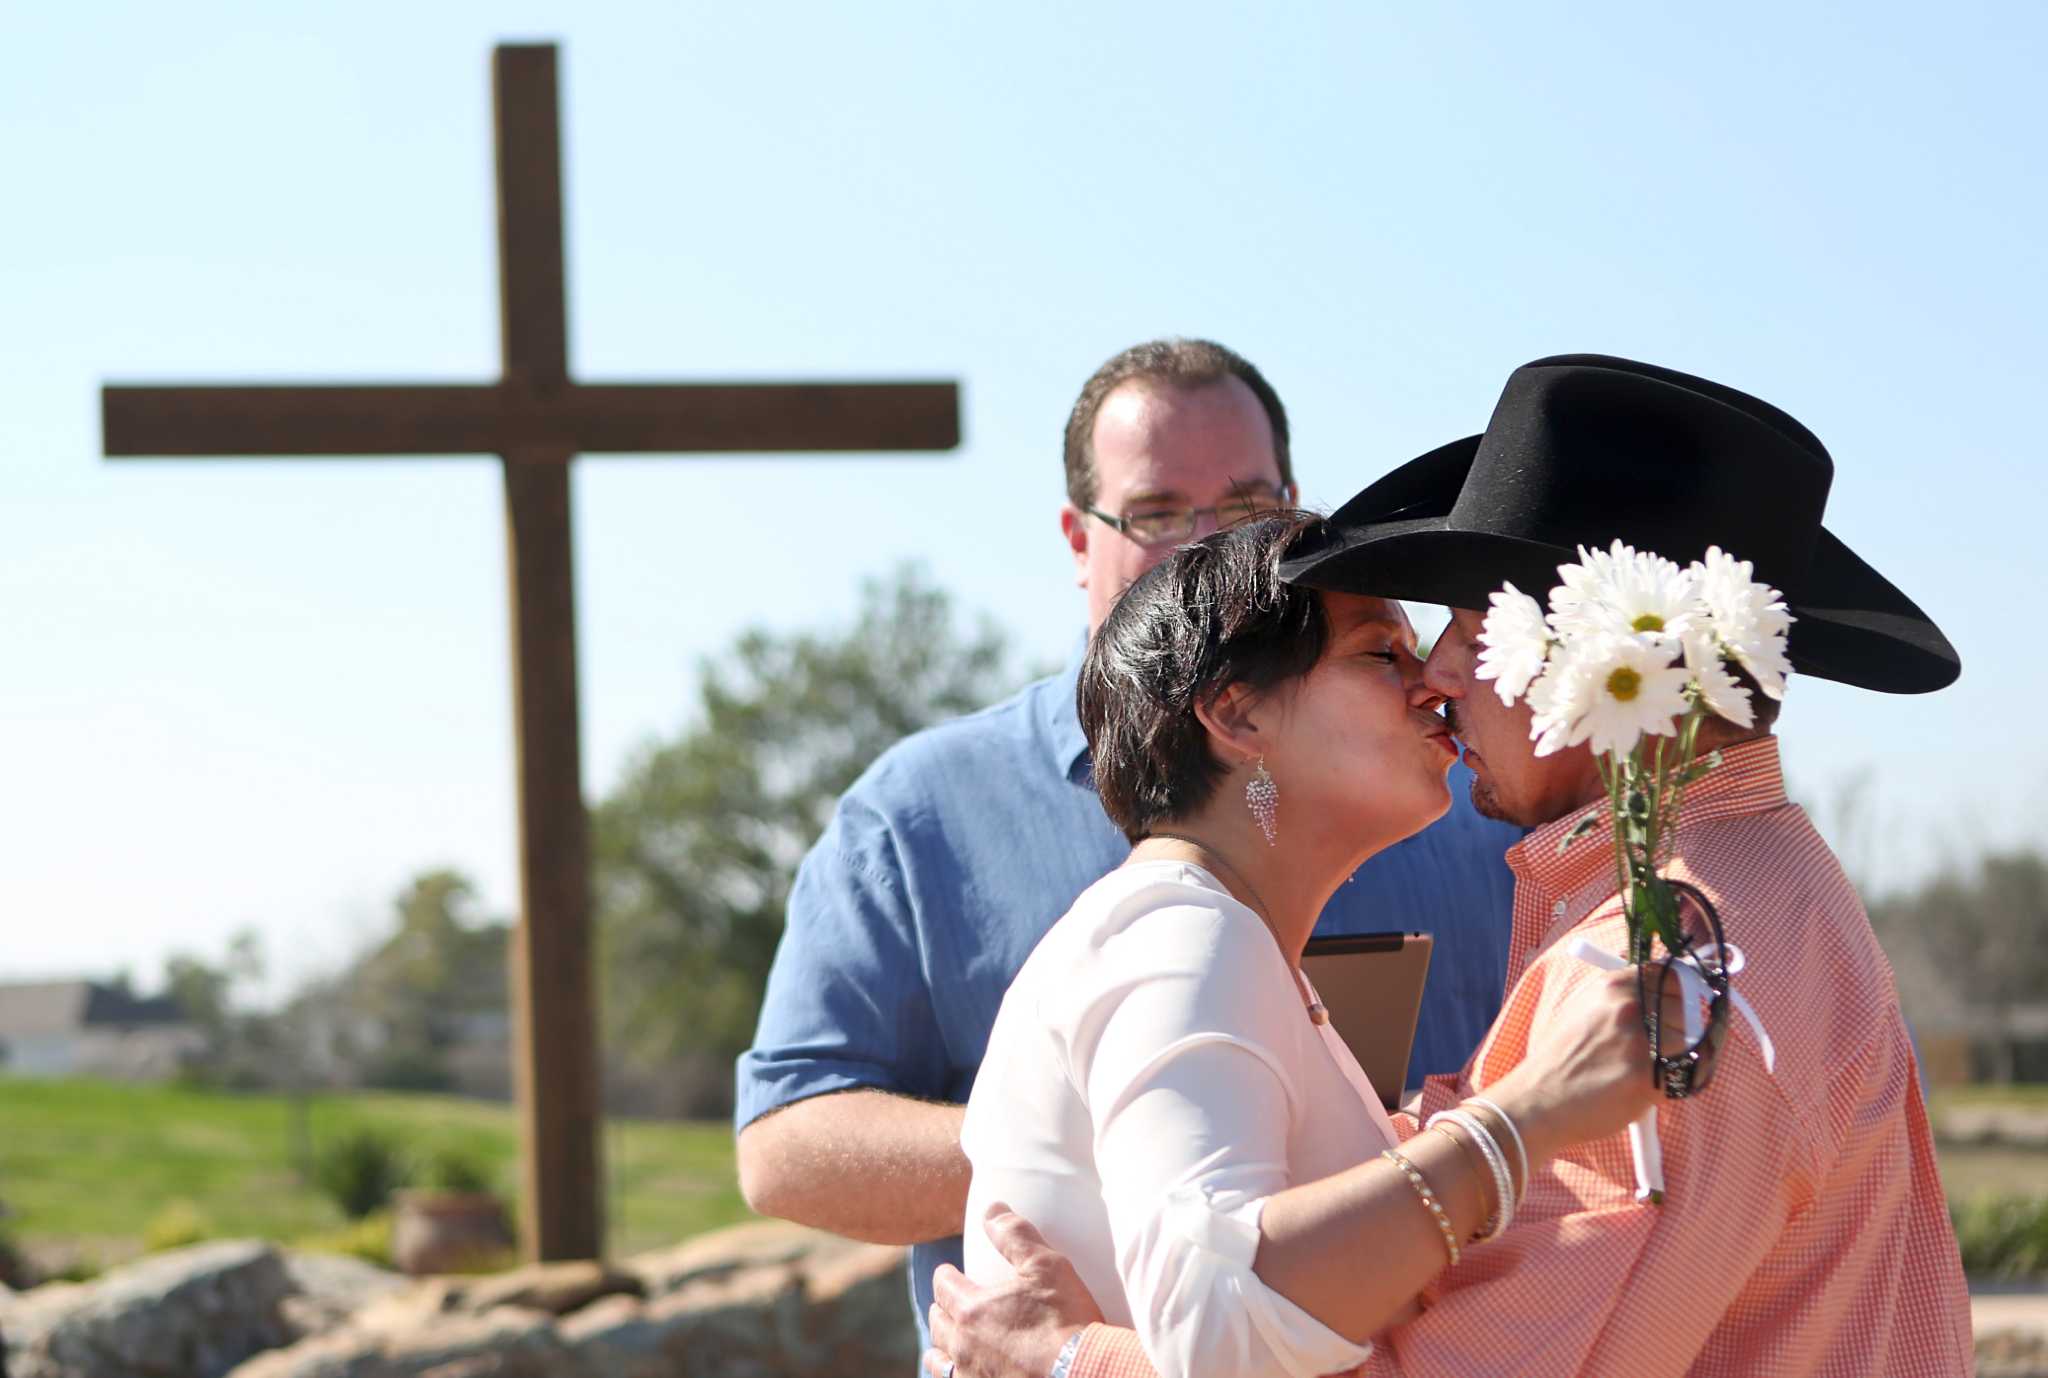 Sex Sermons Inspire Couples To Wed At Mass V Day Ceremony In Katy